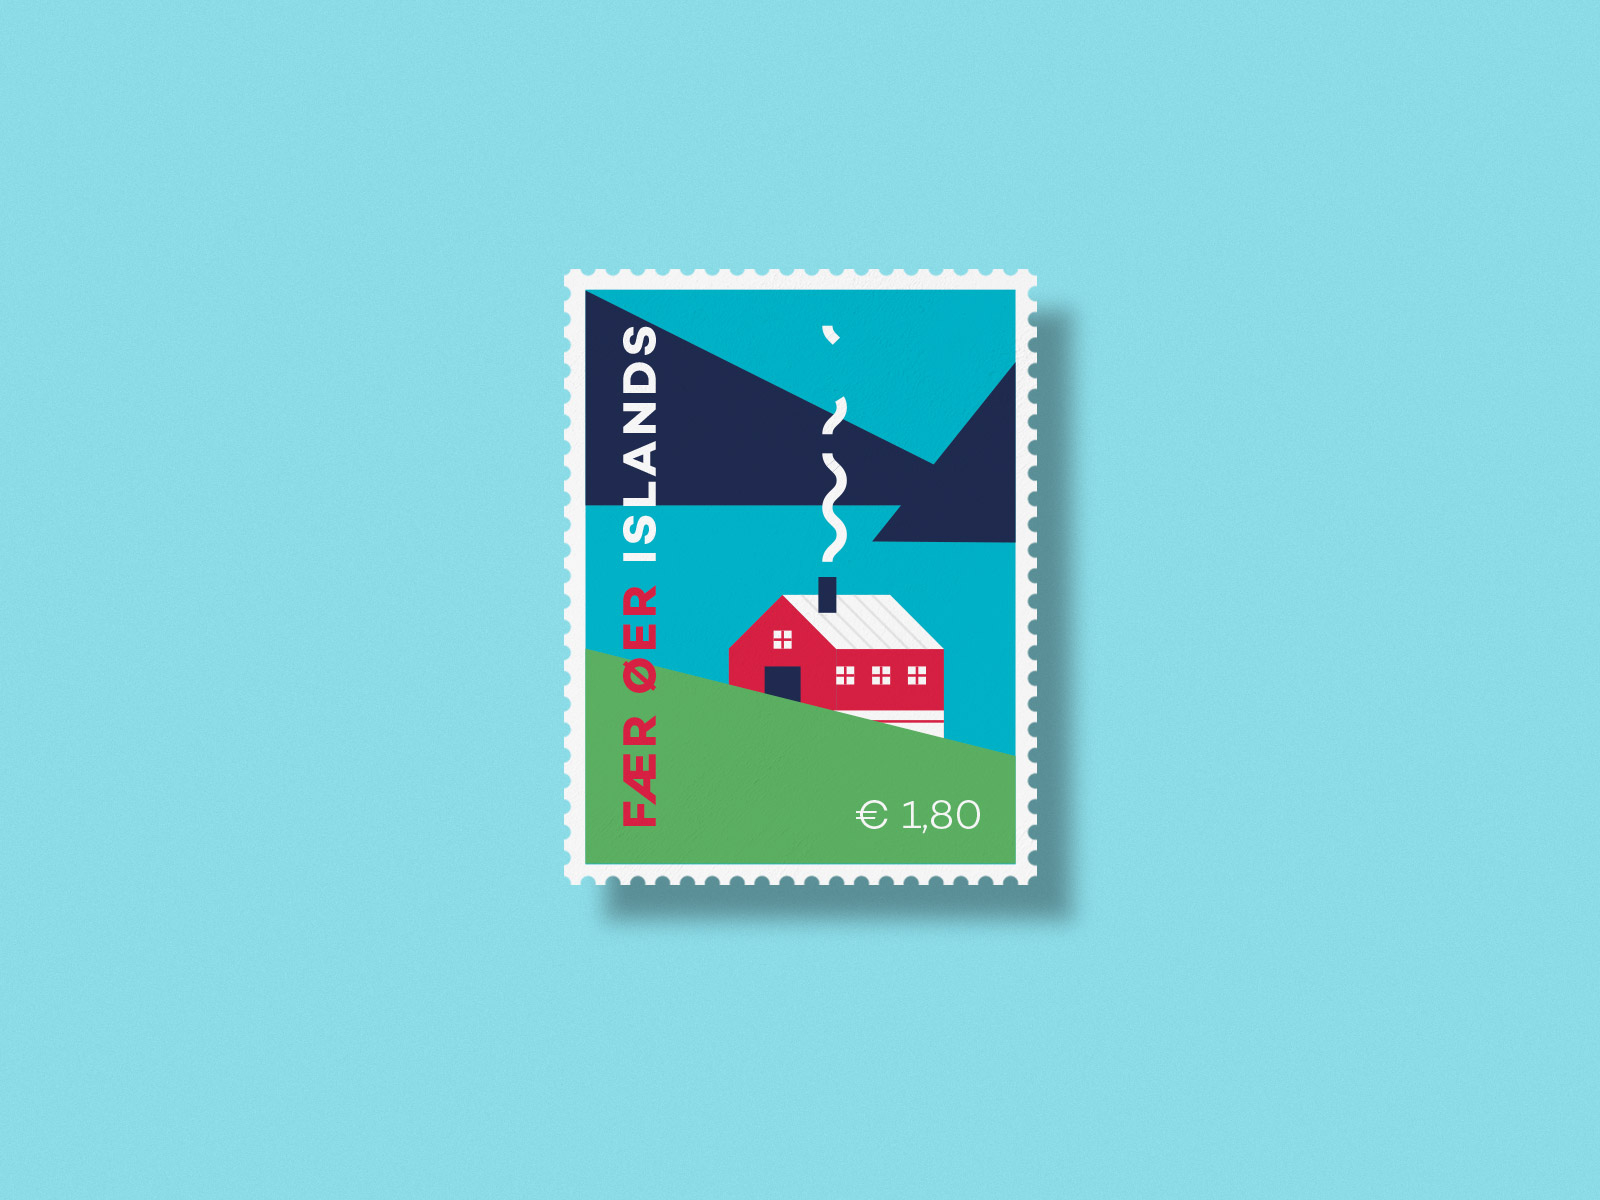 Faer Oer Islands Postage Stamp By Francesco Conte On Dribbble